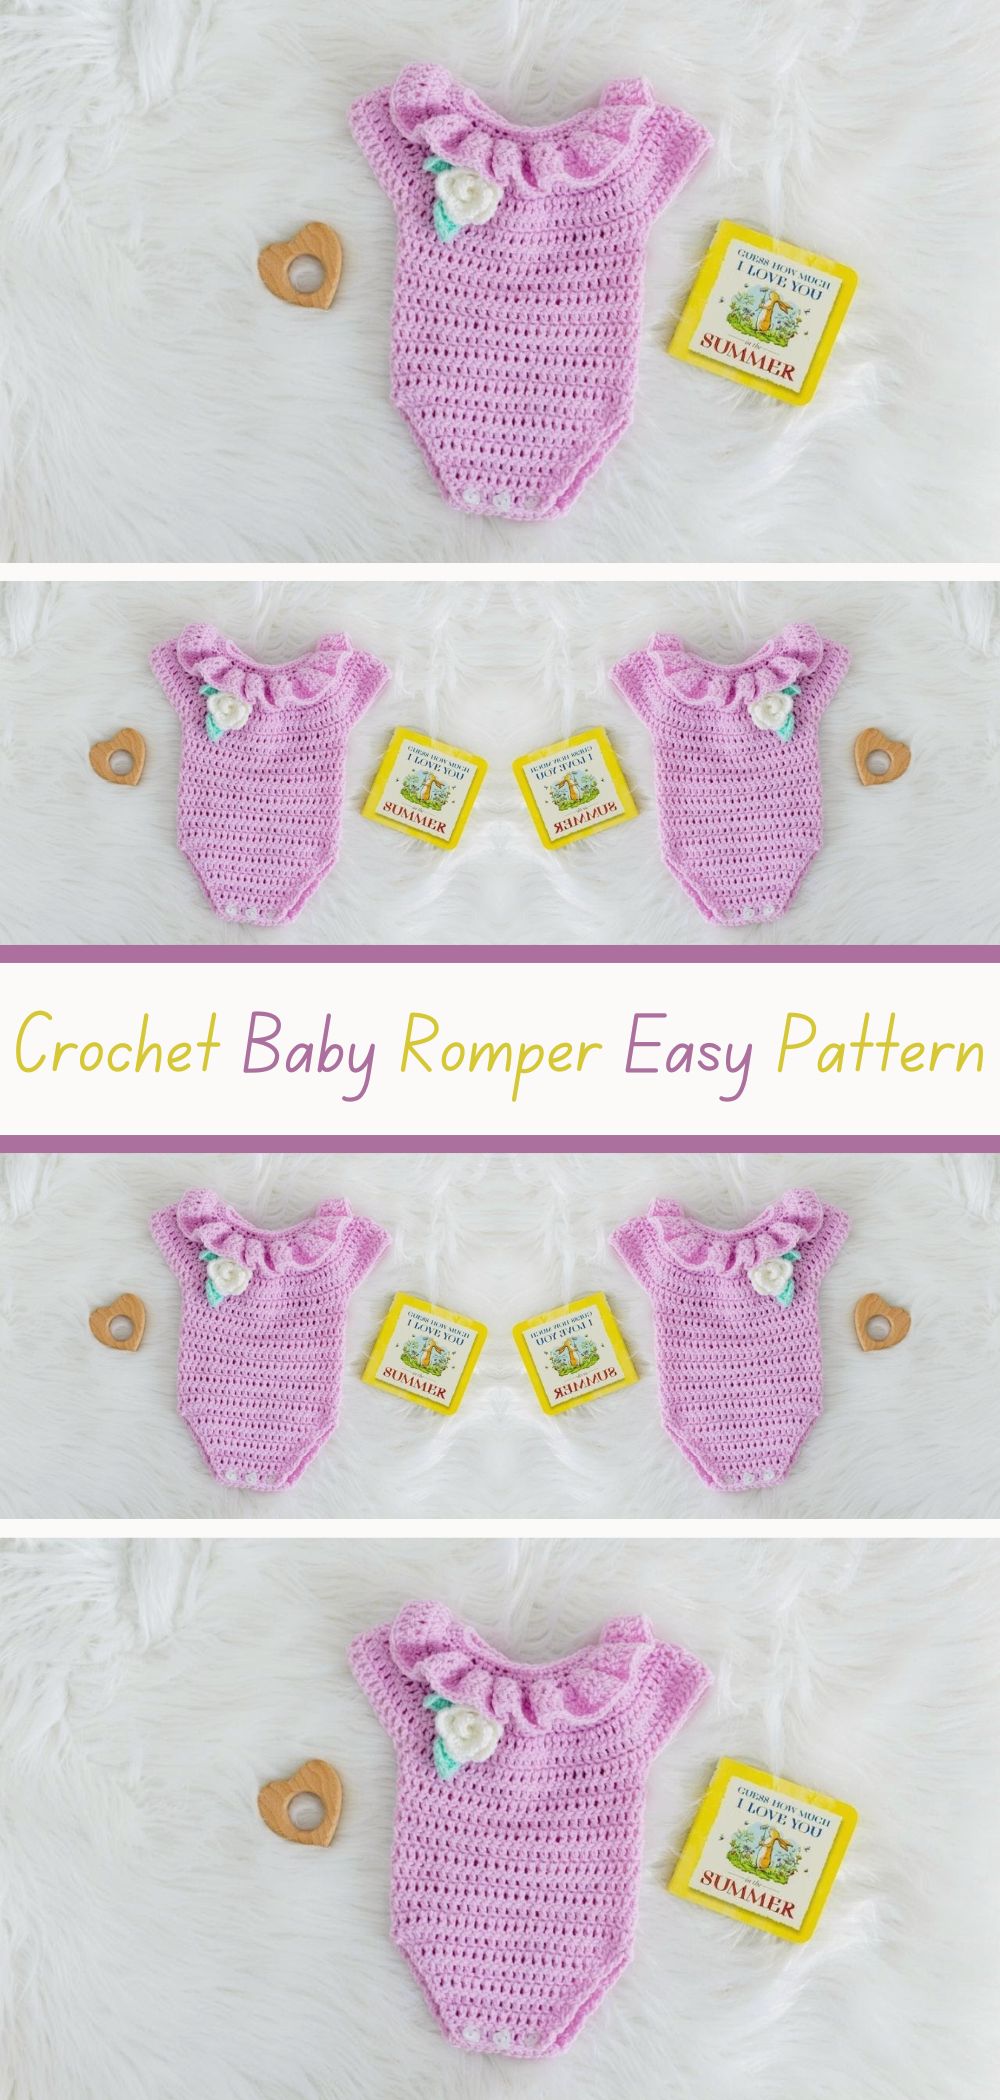 Easy Crochet Baby Romper Pattern - Craft a cozy and cute baby romper with this easy-to-follow crochet pattern